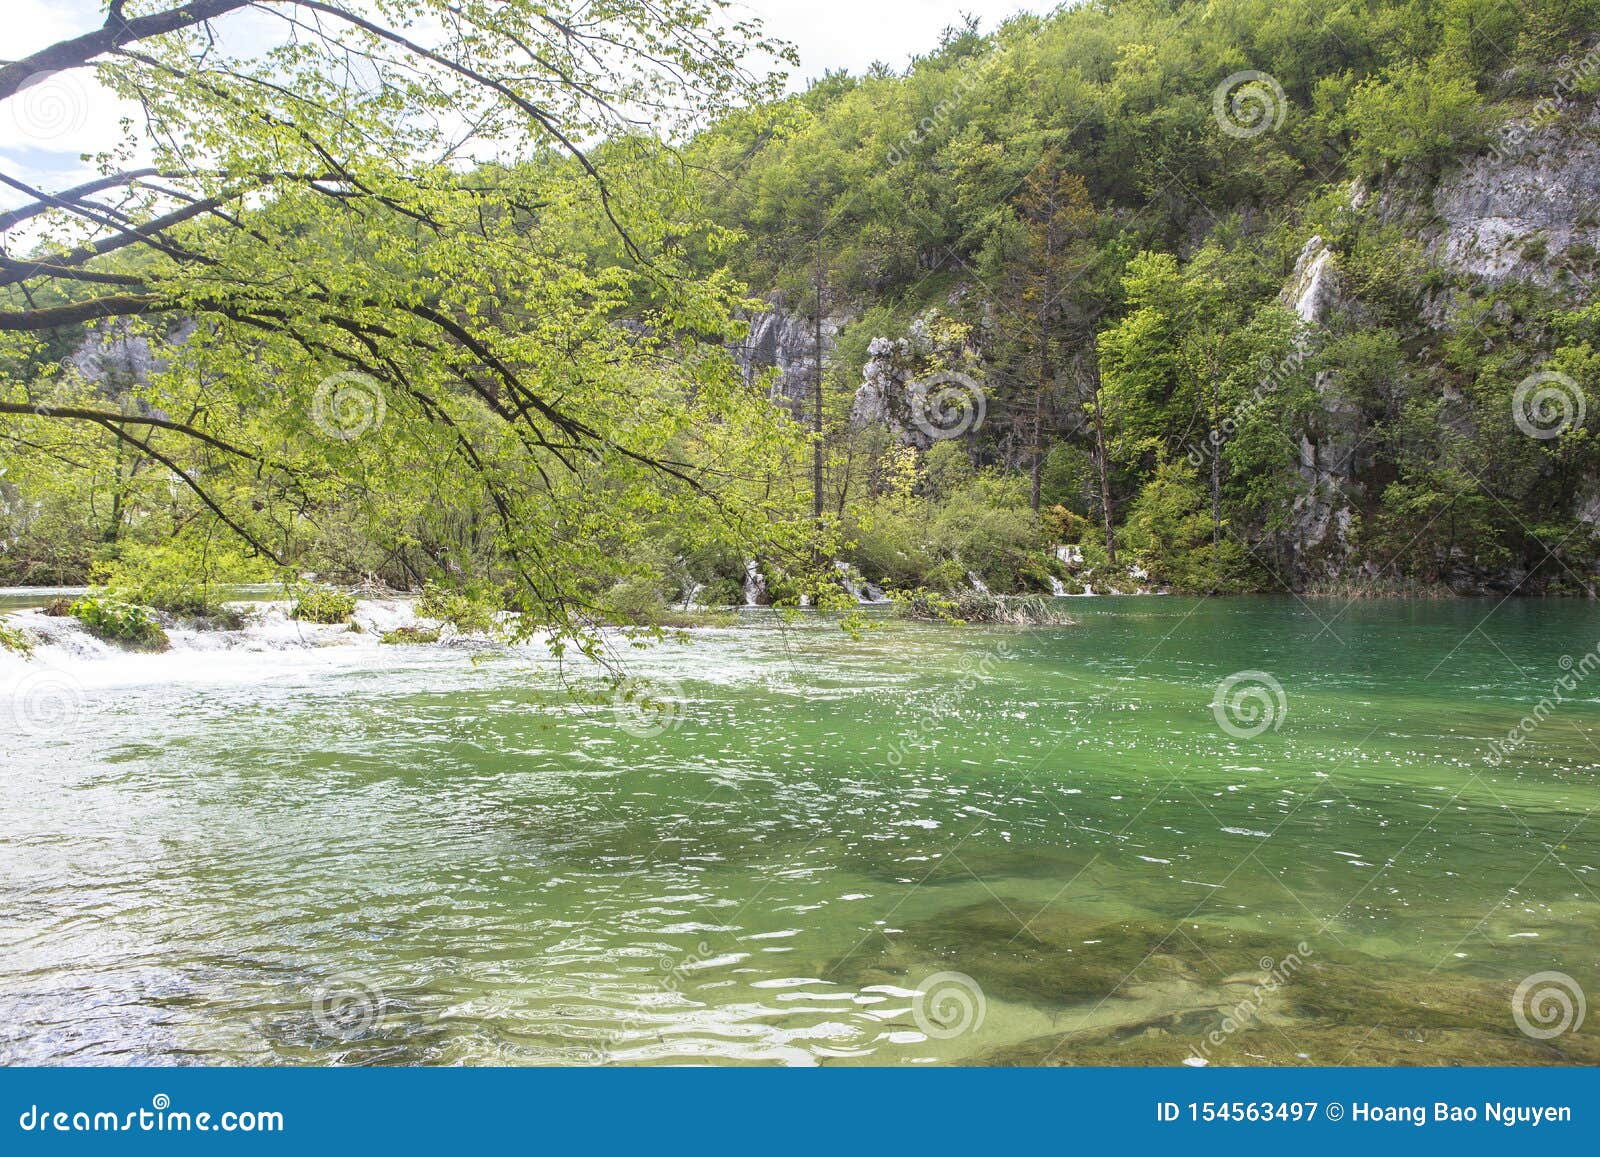 nature of plitvice lakes national park in summer